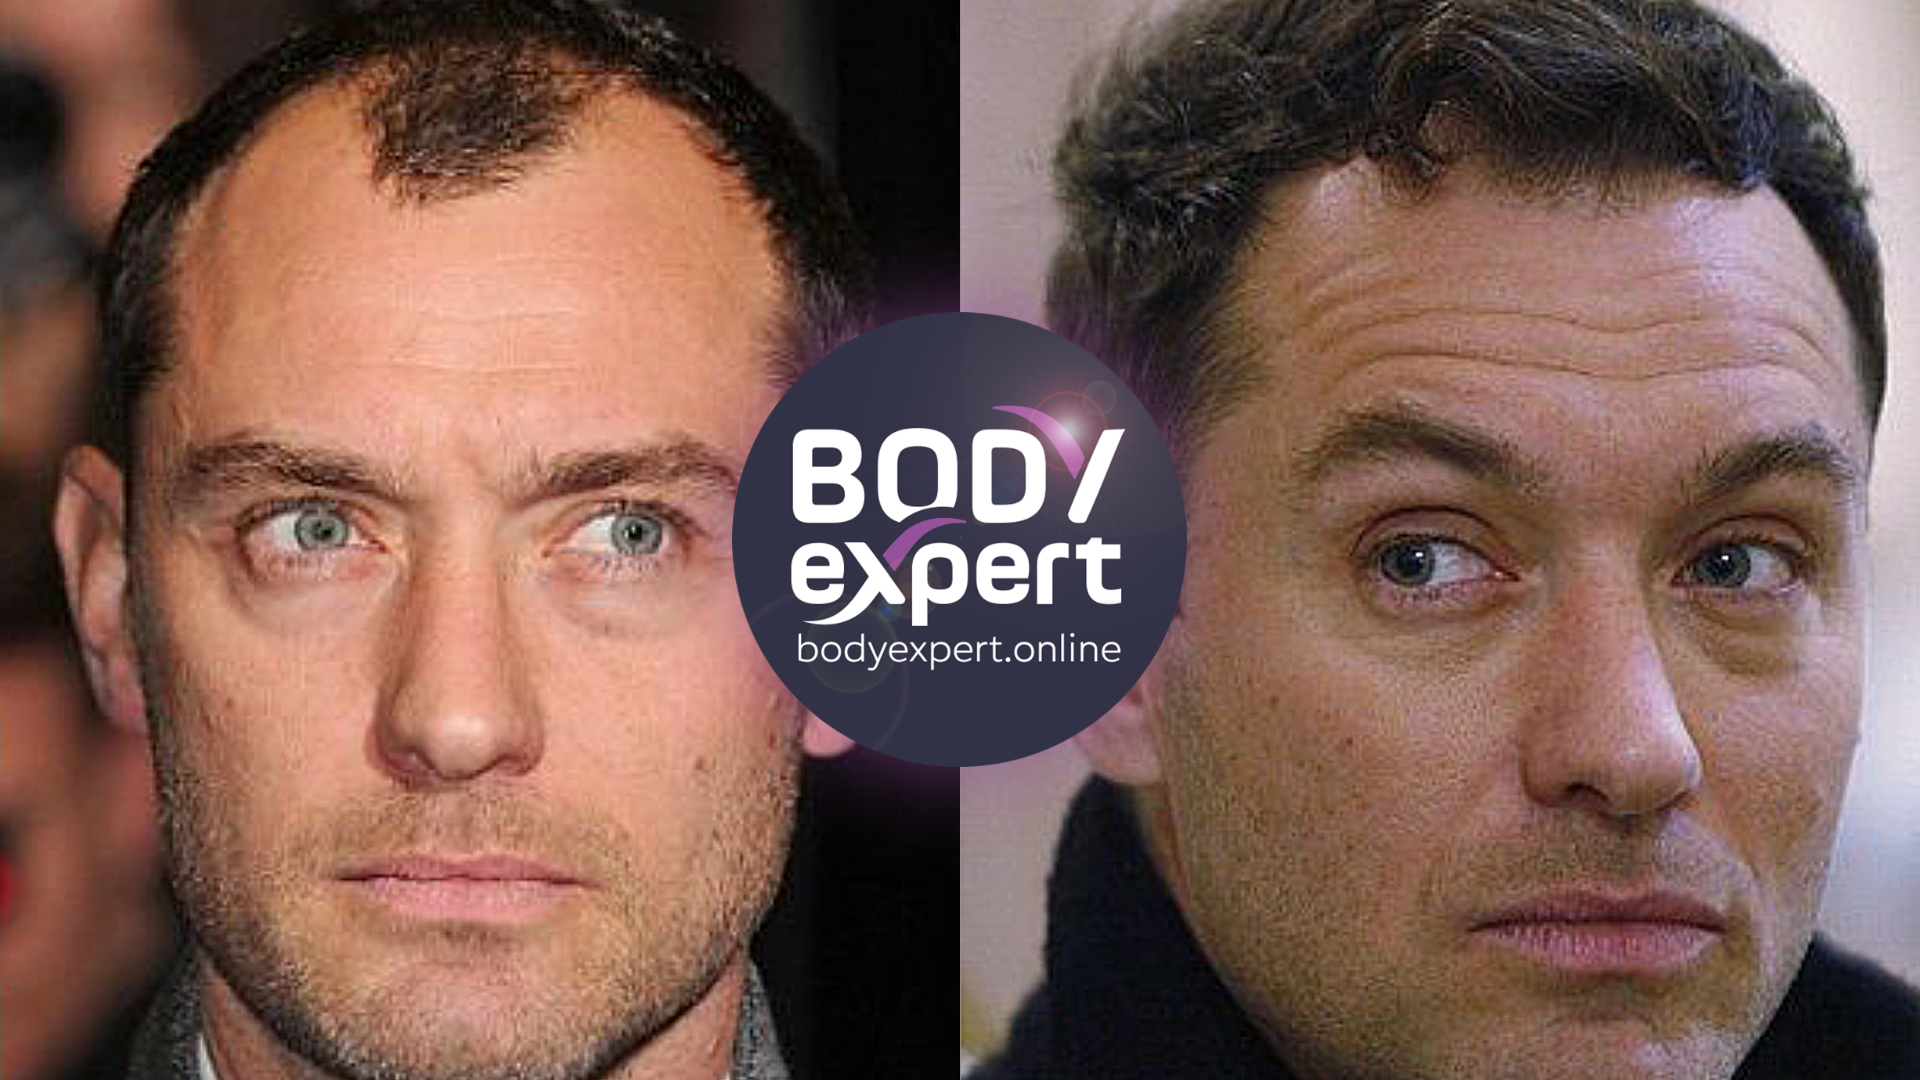 has Jude Law had a hair transplant? Not just one but two.